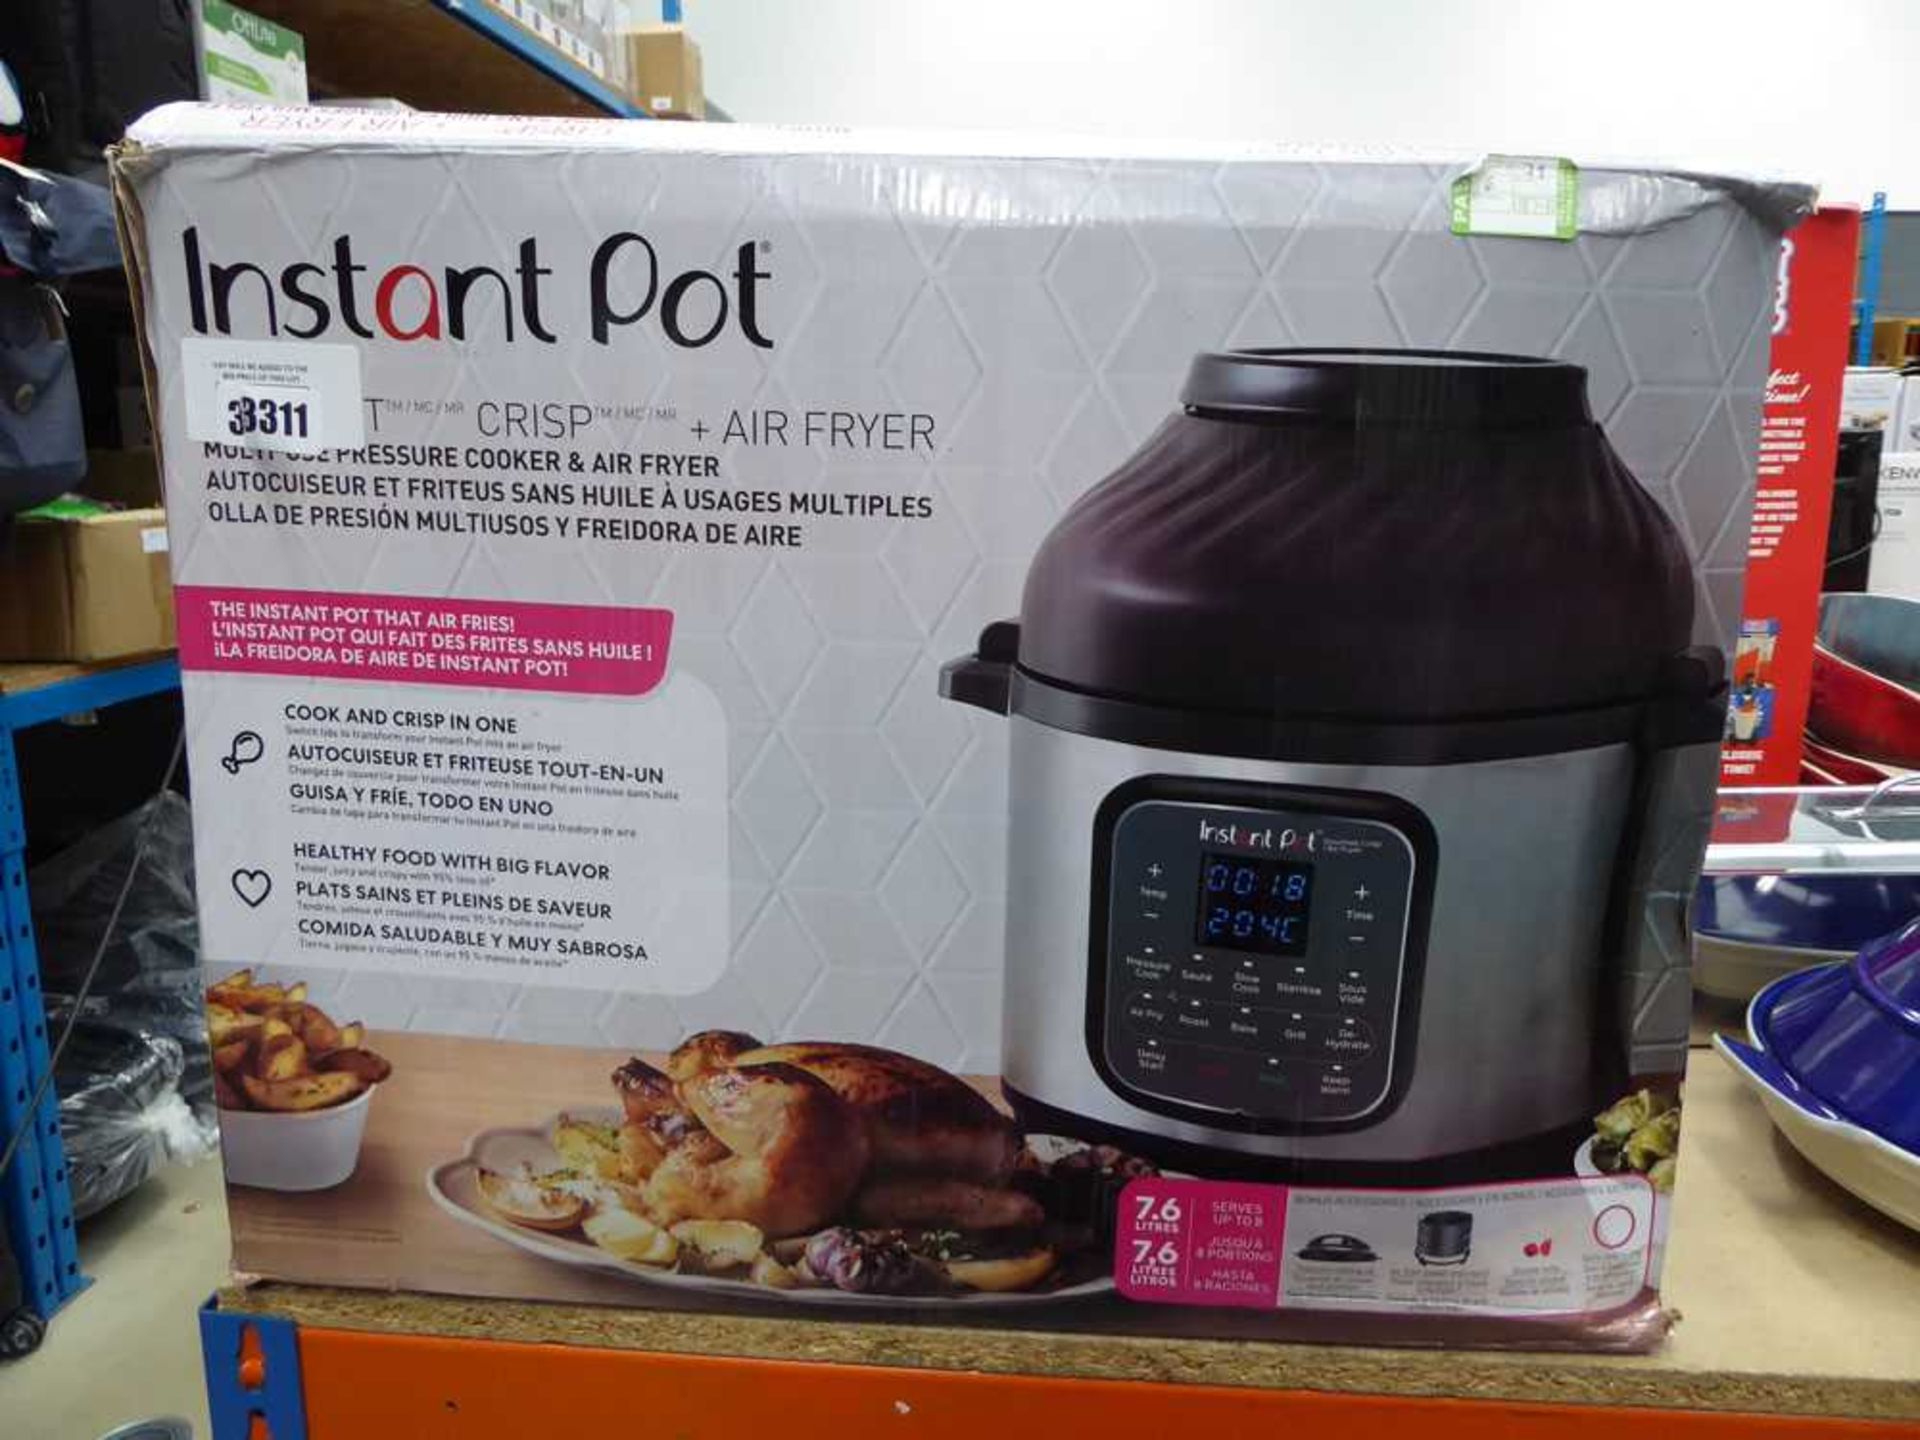 Instant Pot multi use pressure cooker and air fryer